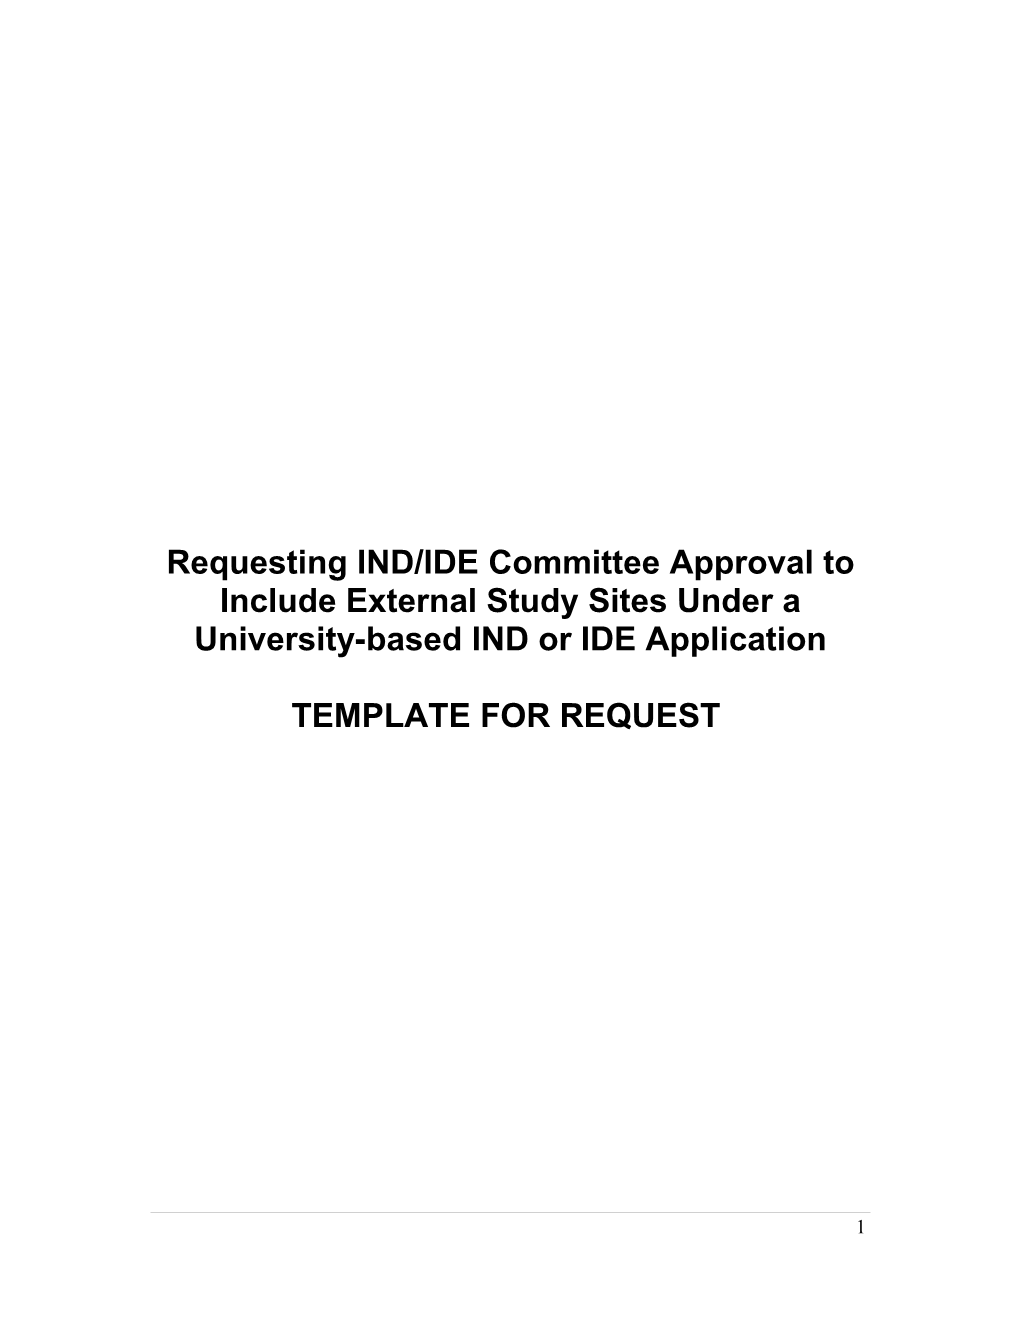 Requesting IND/IDE Committee Approval to Include External Study Sites Under a University-Based